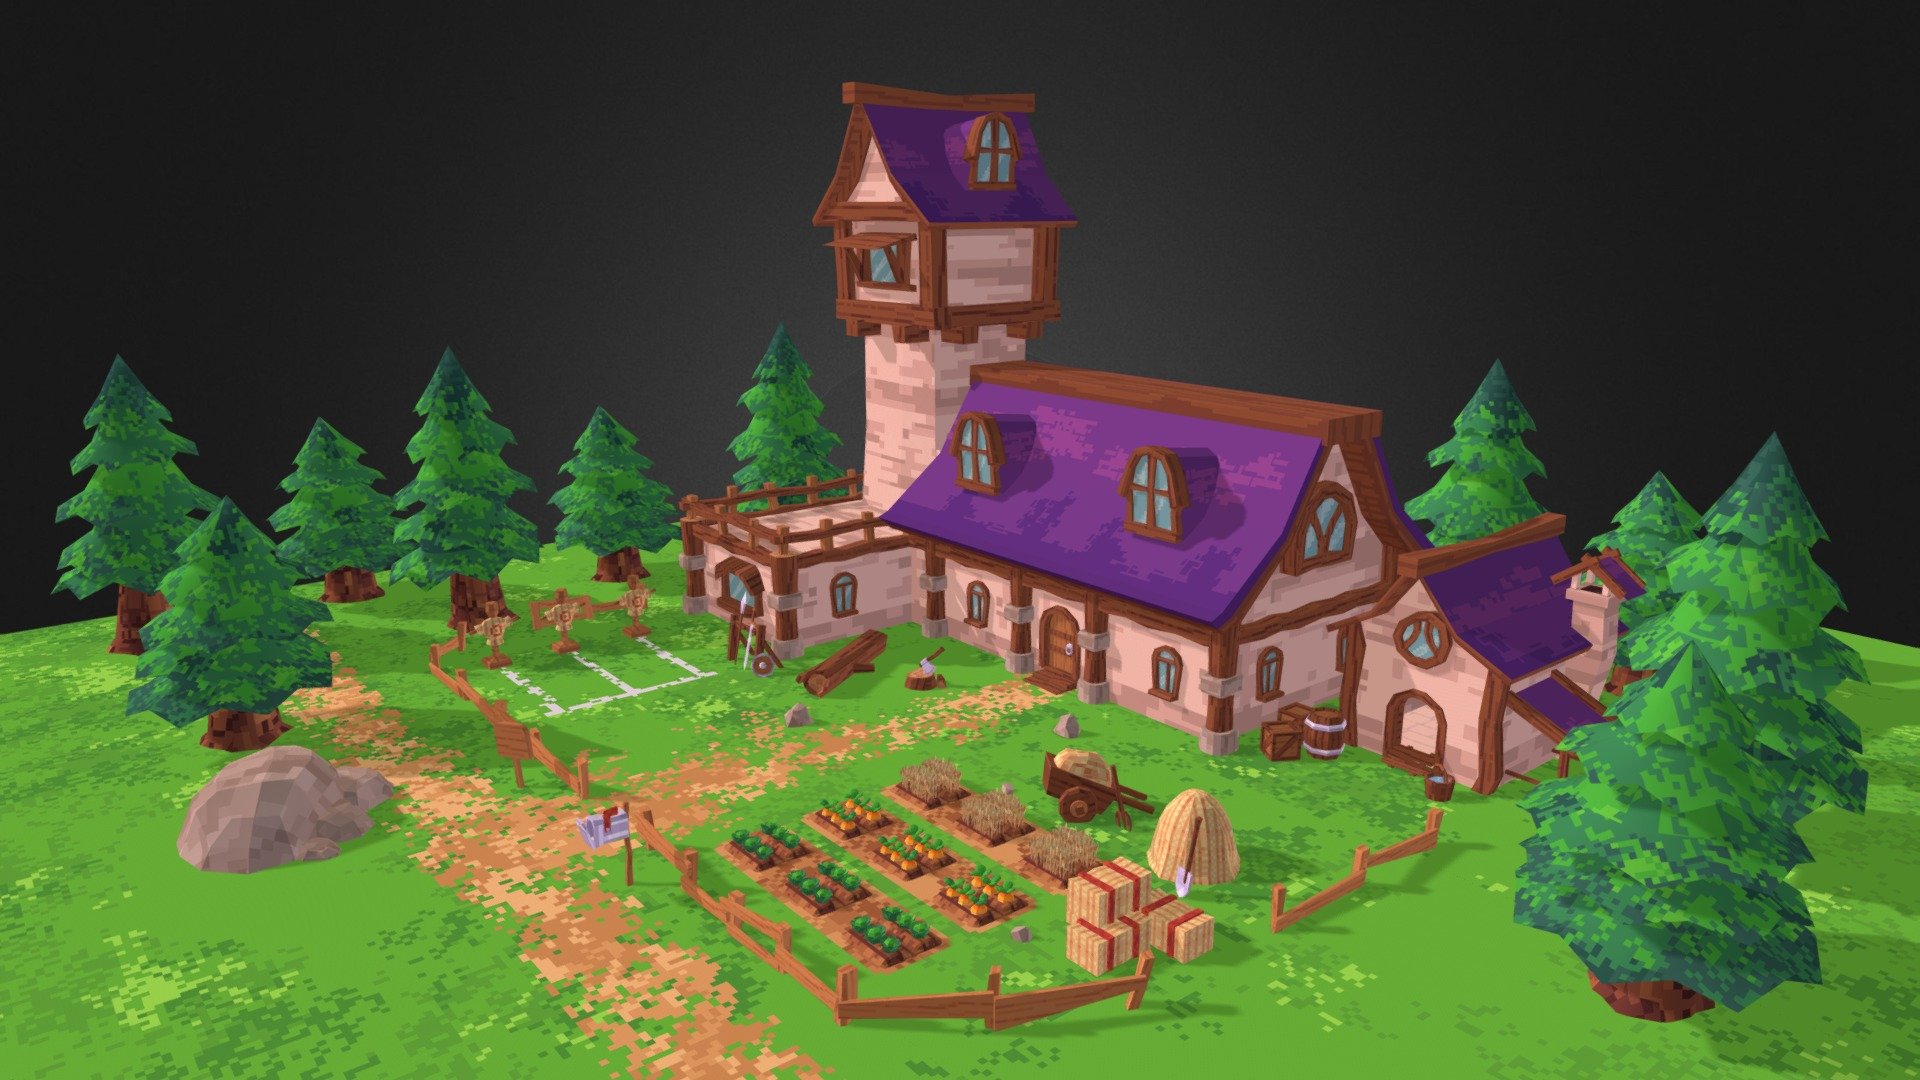 Farm house with combat training area. 
Experiementing with blender pixel-art. 
Planning to use this as base for a hero management game I am developing.

Unity scene screenshot: https://twitter.com/cupkekgames/status/1608320691723702273 - Medieval Farm House - 3D model by Lix3nn 3d model